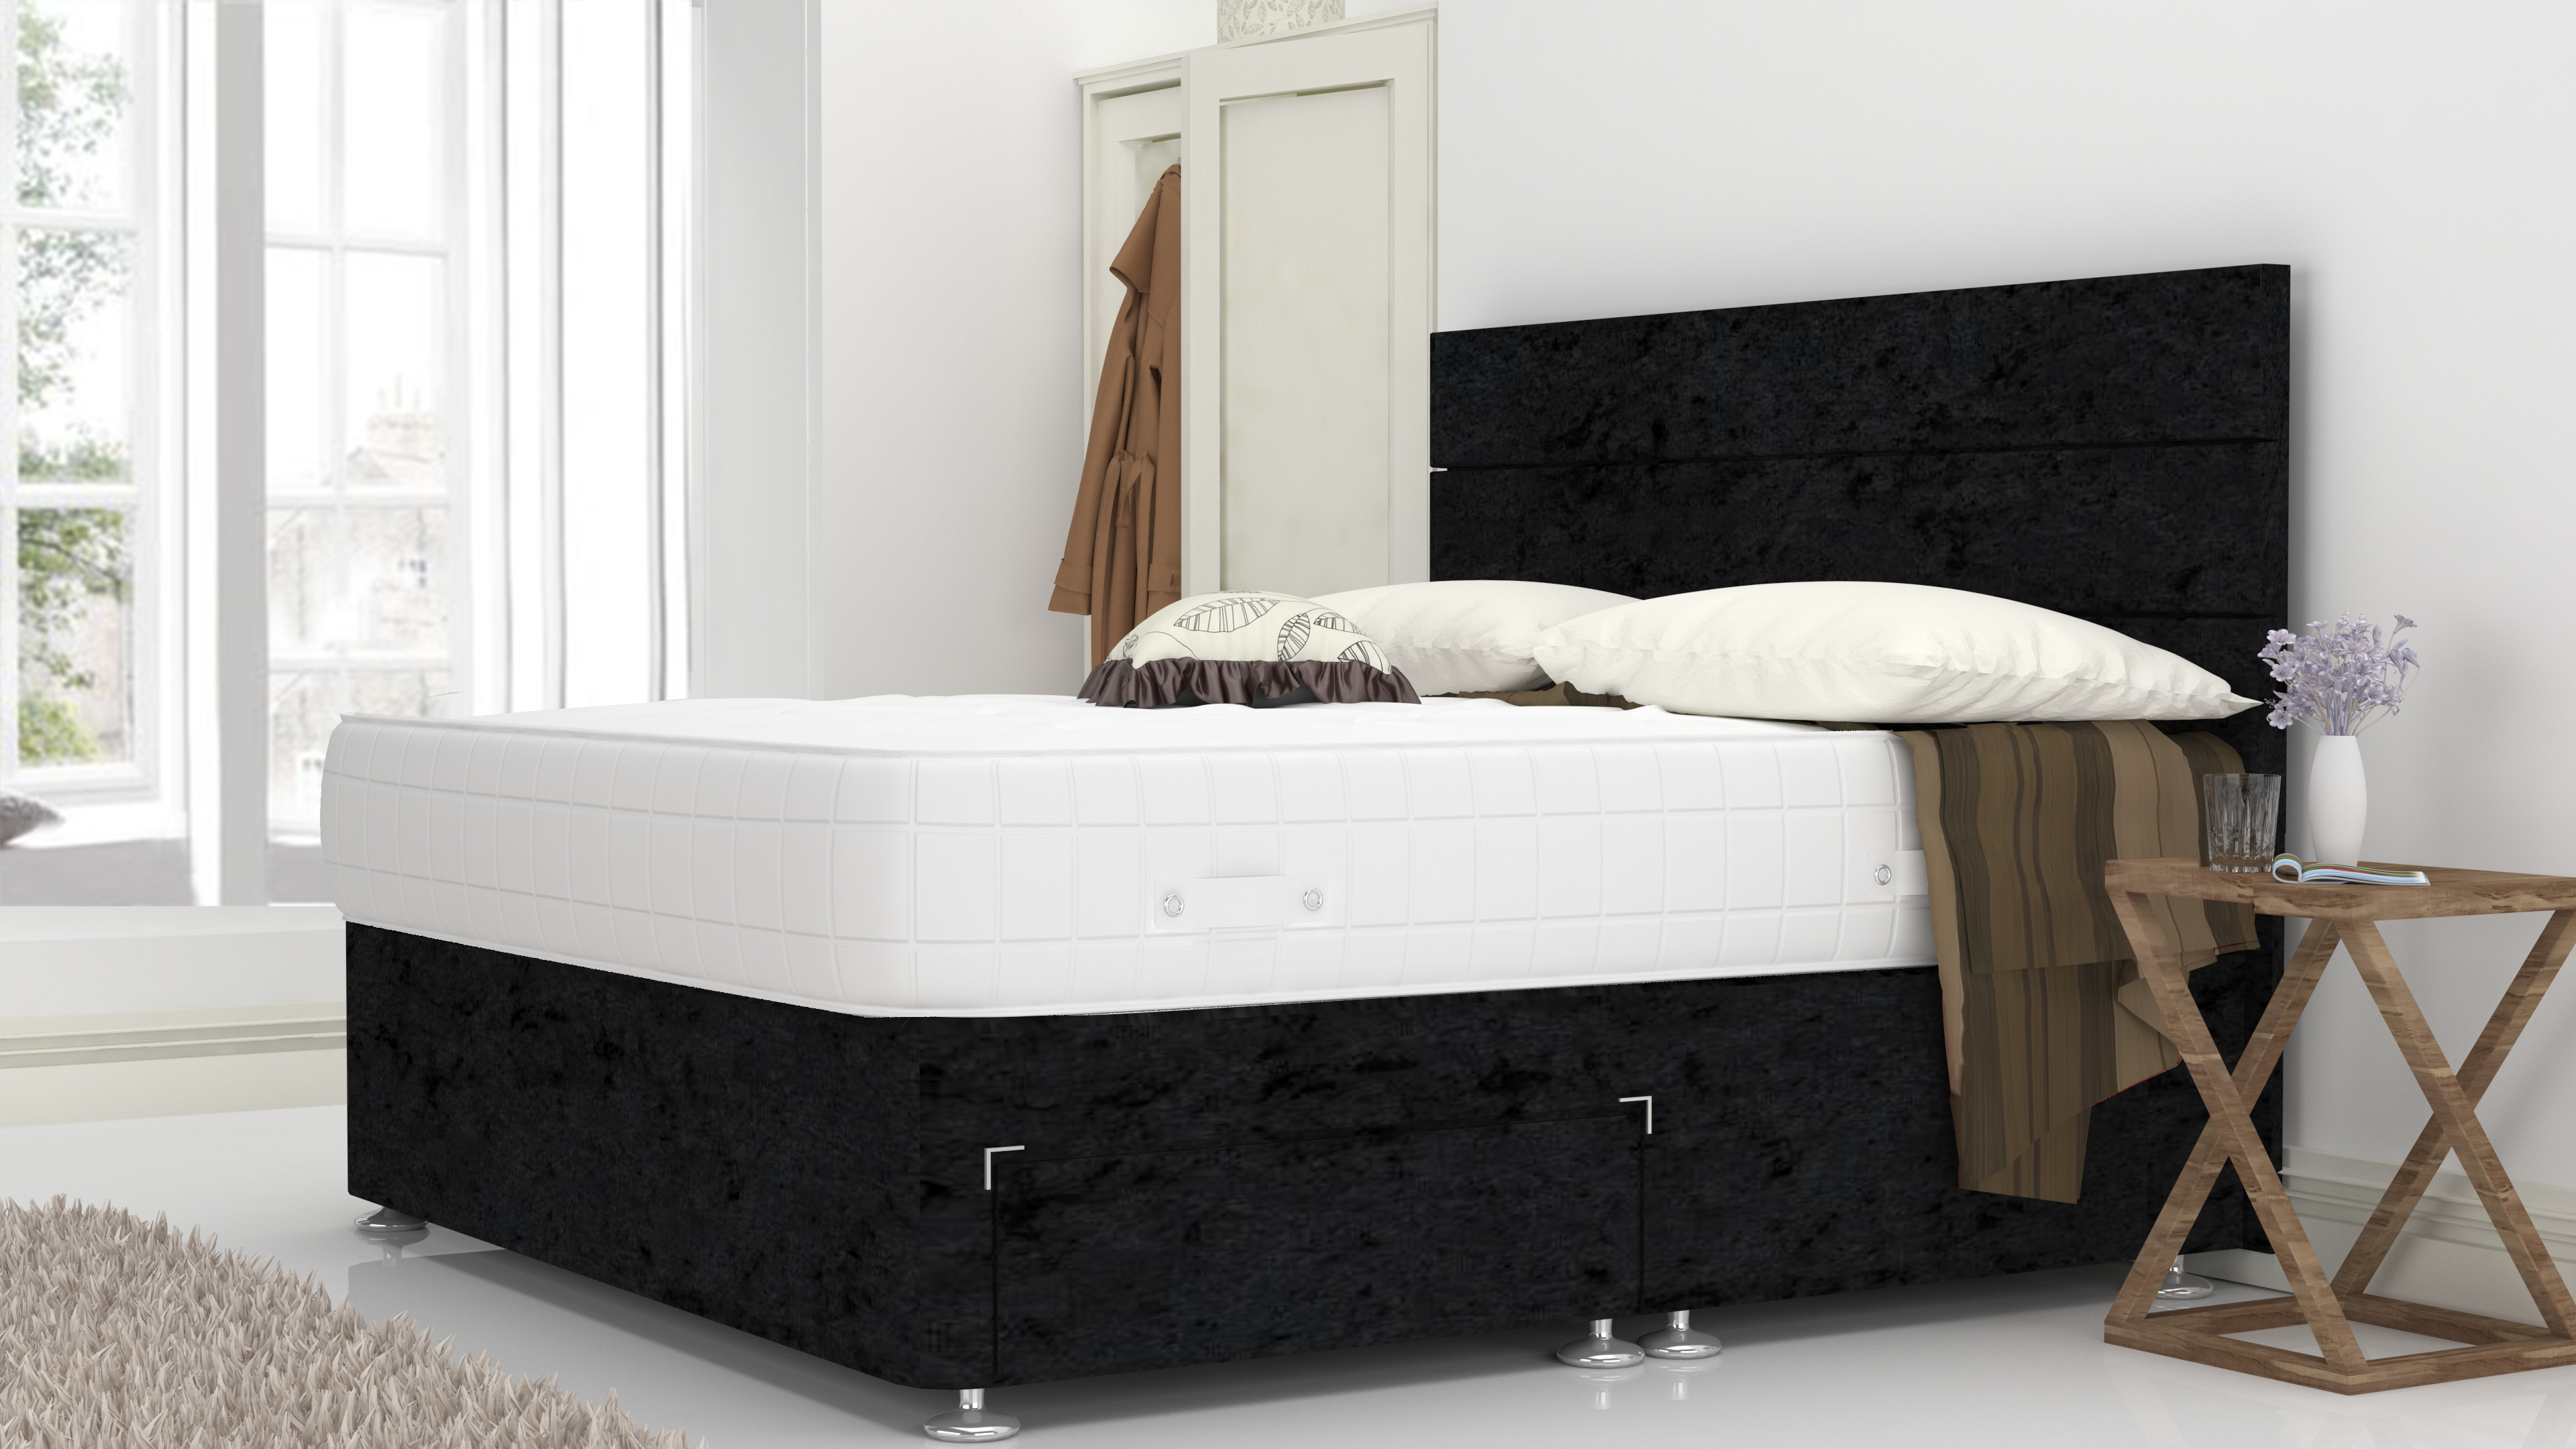 Black Crushed 3 Feet Divan Bed Set With 3 Panel Headboard (Included Feet) And Free Pillow Top Mattress